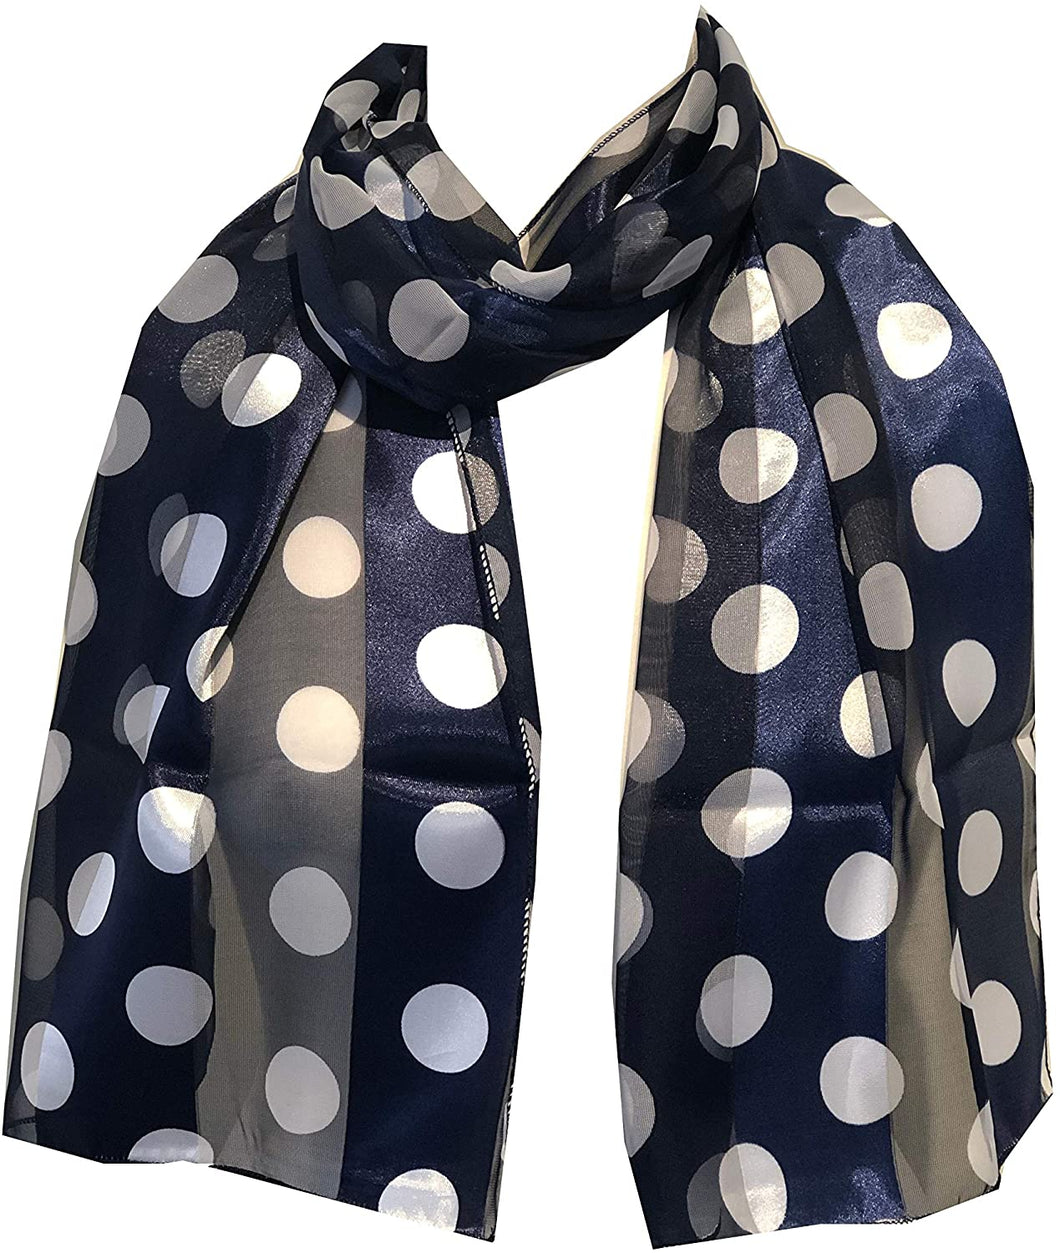 Navy with White Big spot Thin Pretty Scarf. Lovely with Any Outfit. 50's Style Scarf